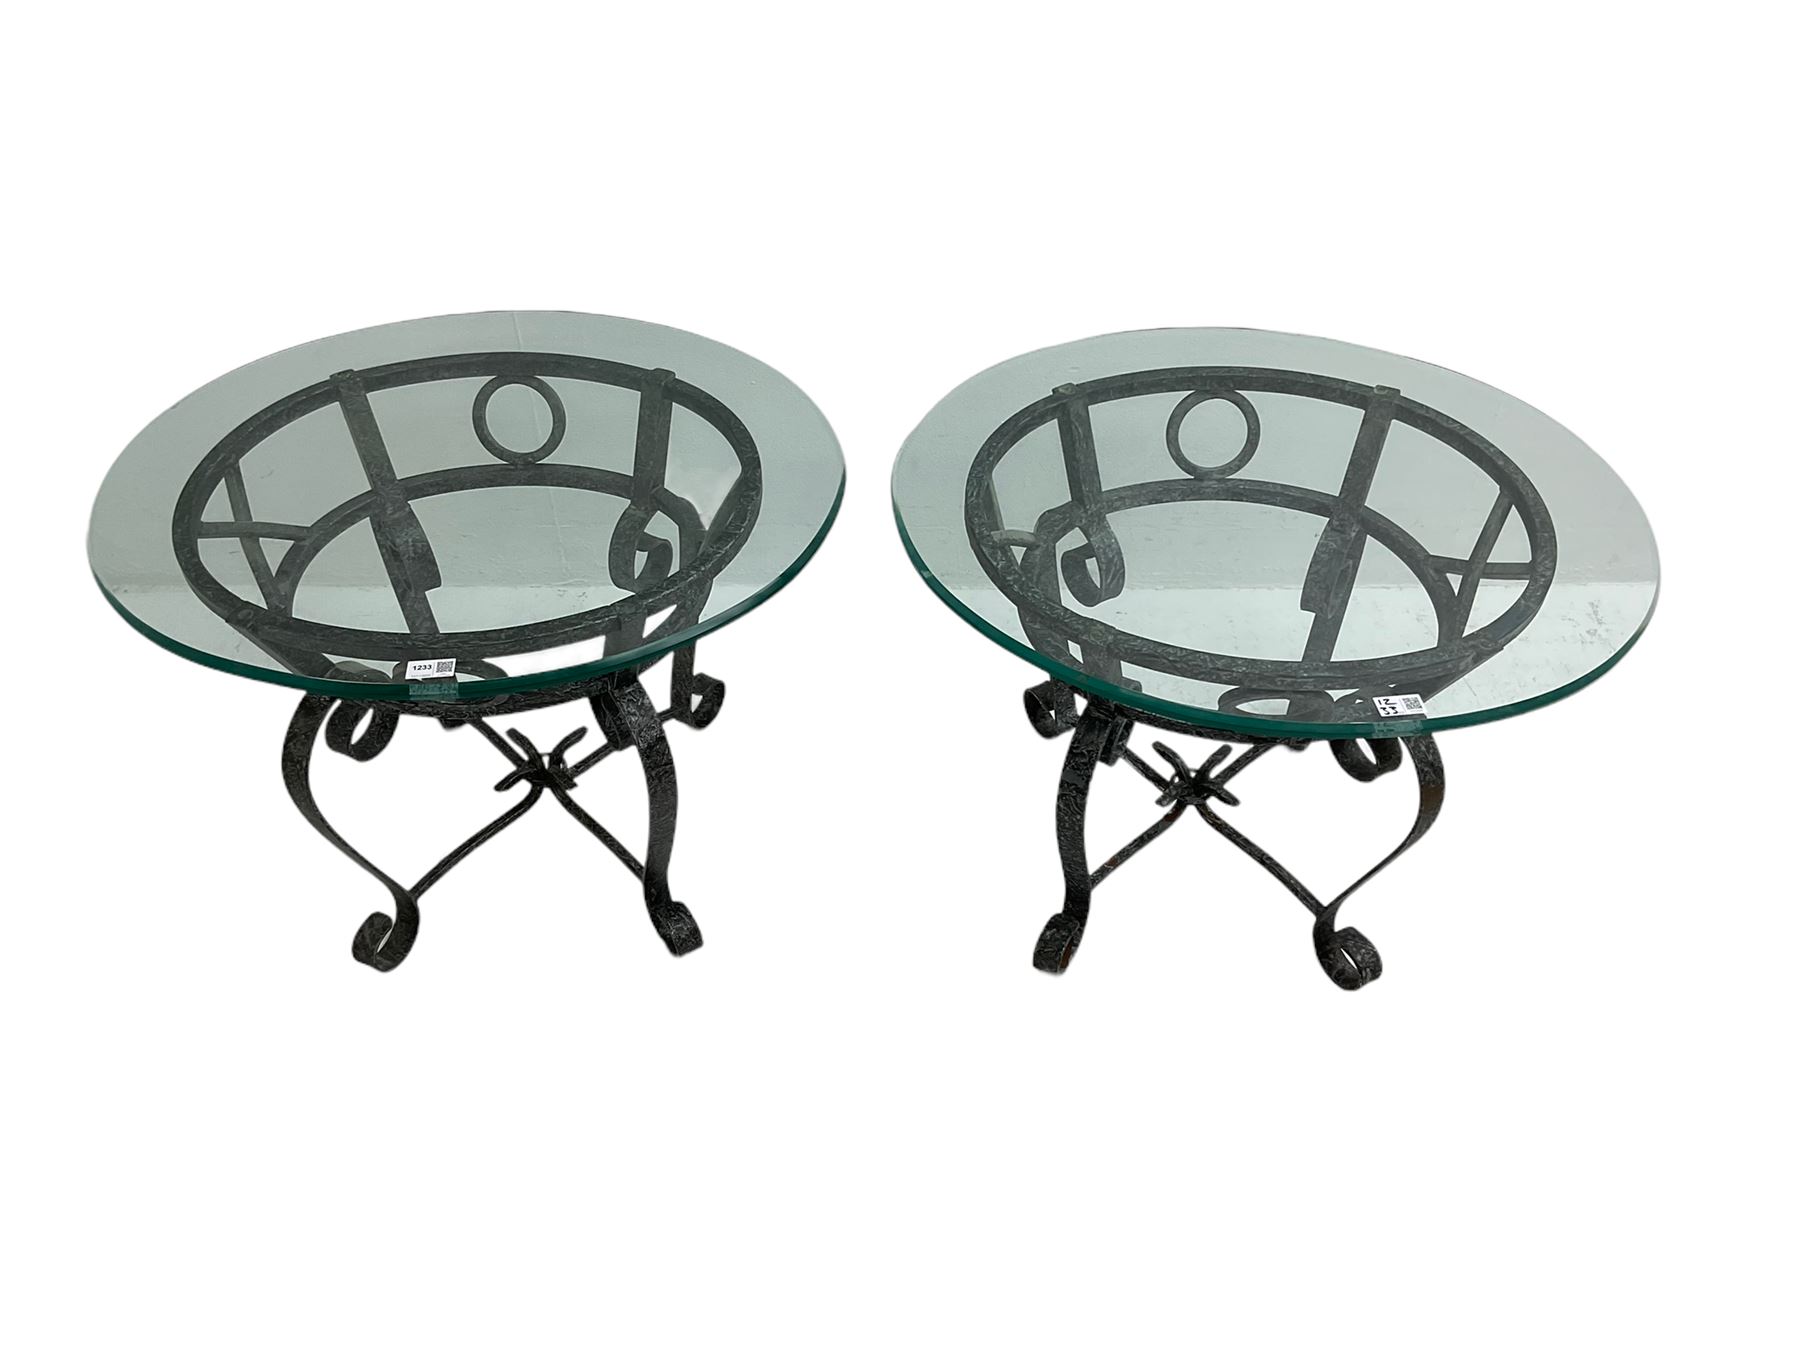 Pair of wrought metal and glass top oval lamp tables - Image 2 of 5